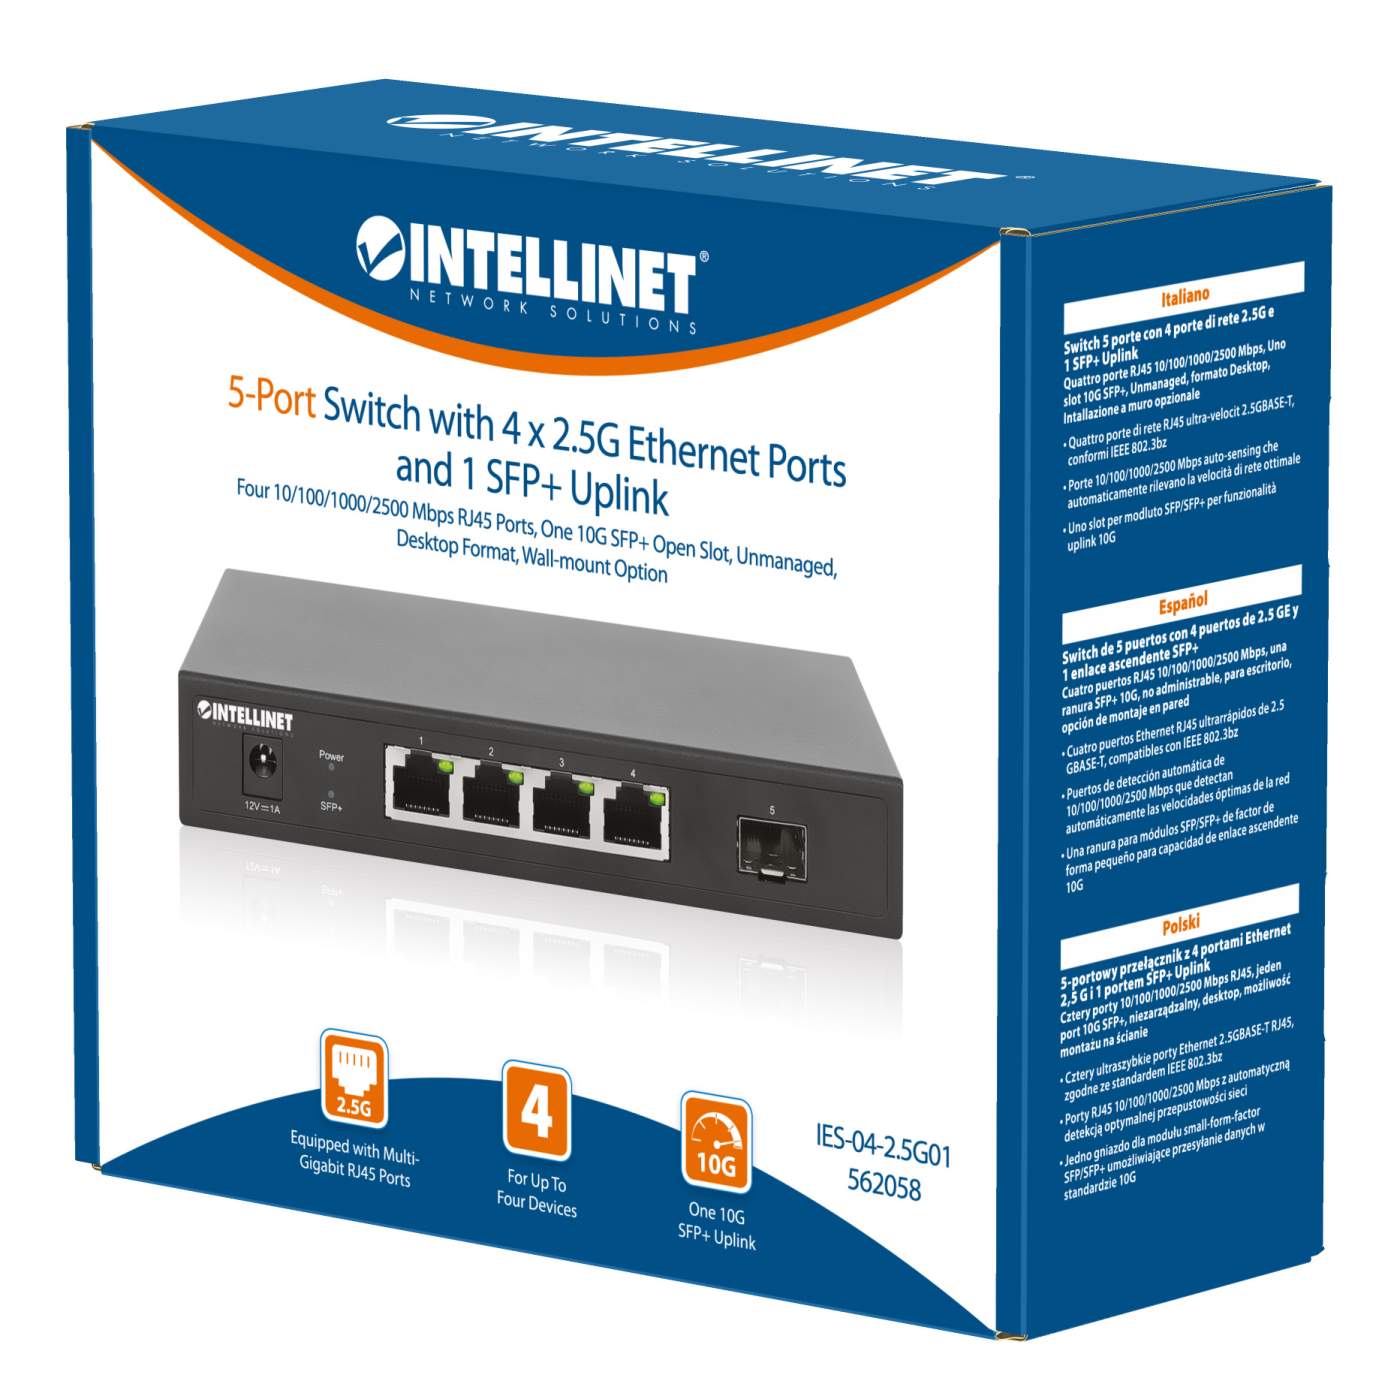 5-Port Switch with 4 x 2.5G Ethernet Ports and 1 SFP+ Uplink Packaging Image 2